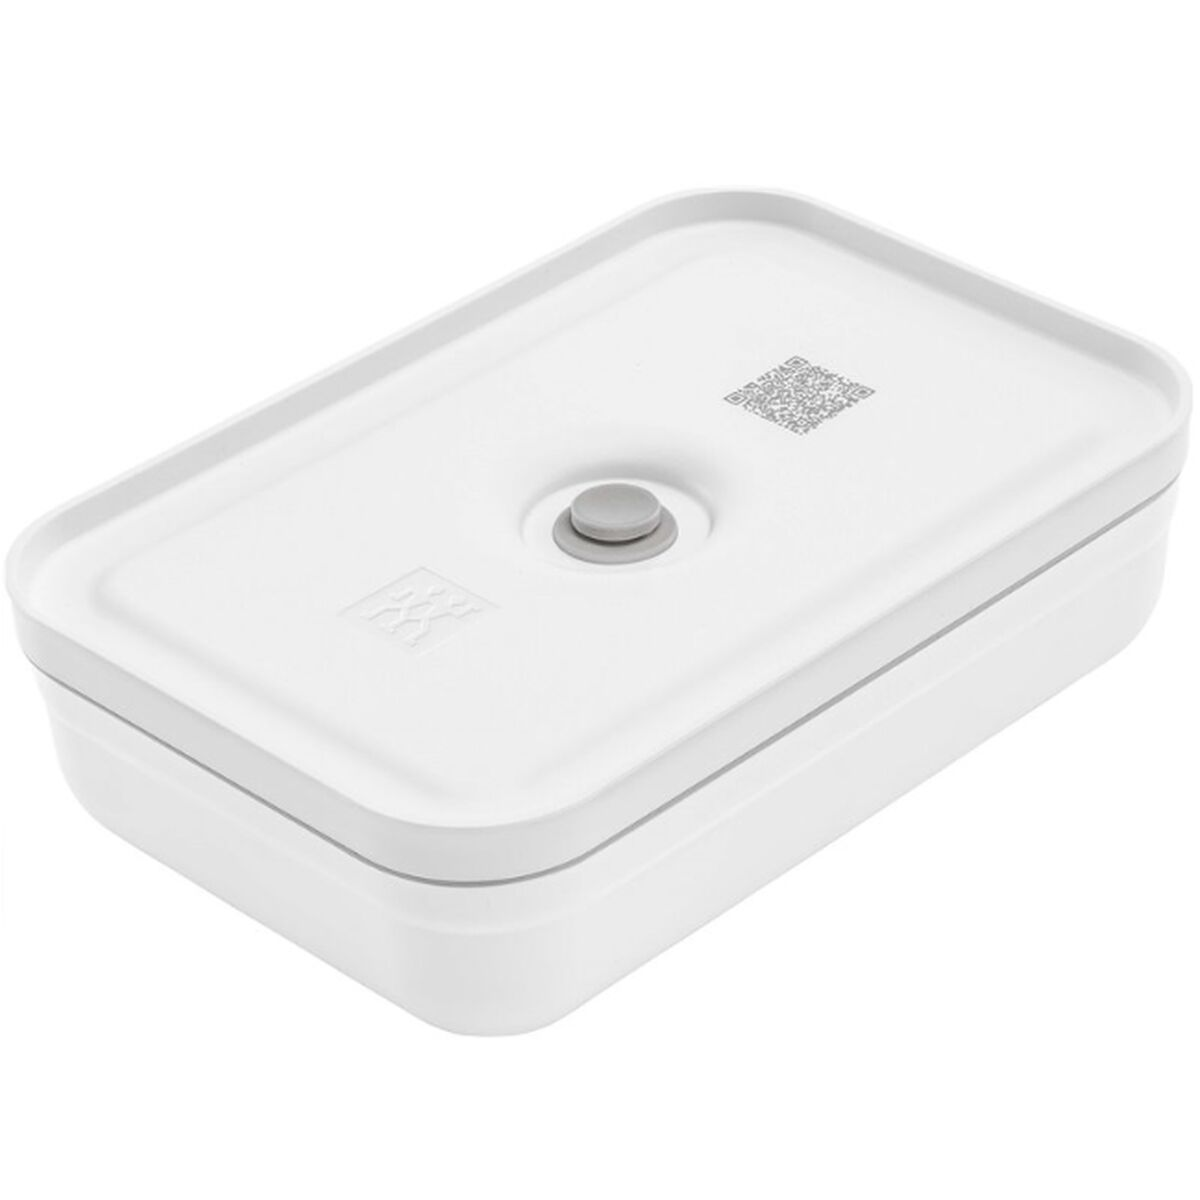 & Fresh ZWILLING Save Lunchbox